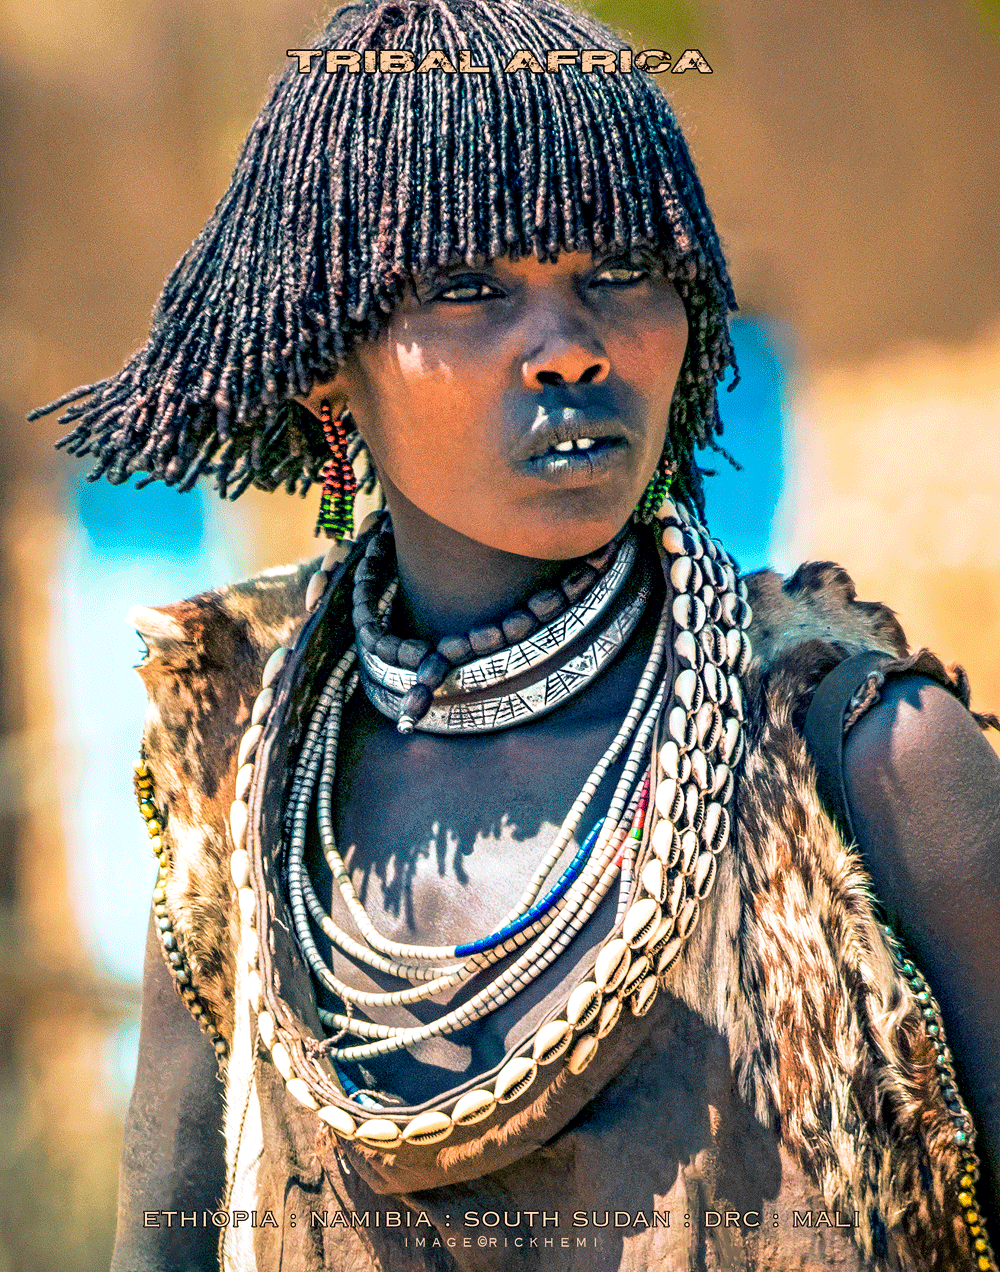 solo overland travel, solo overland Africa, no travel time limits Africa, tribal snap by Rick Hemi